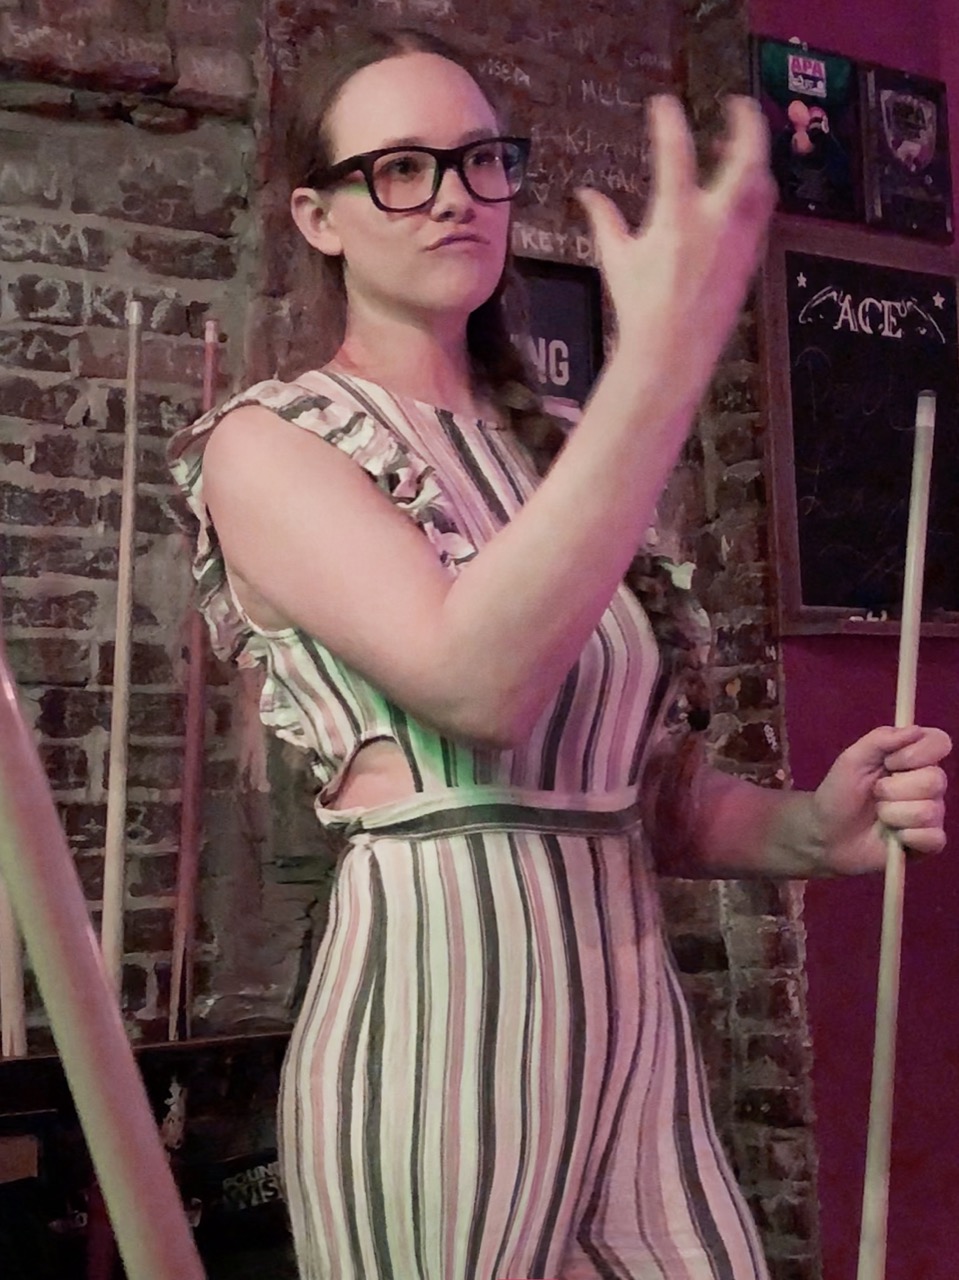 A picture of Hannah holding a pool stick in one hand and the other hand gesturing.